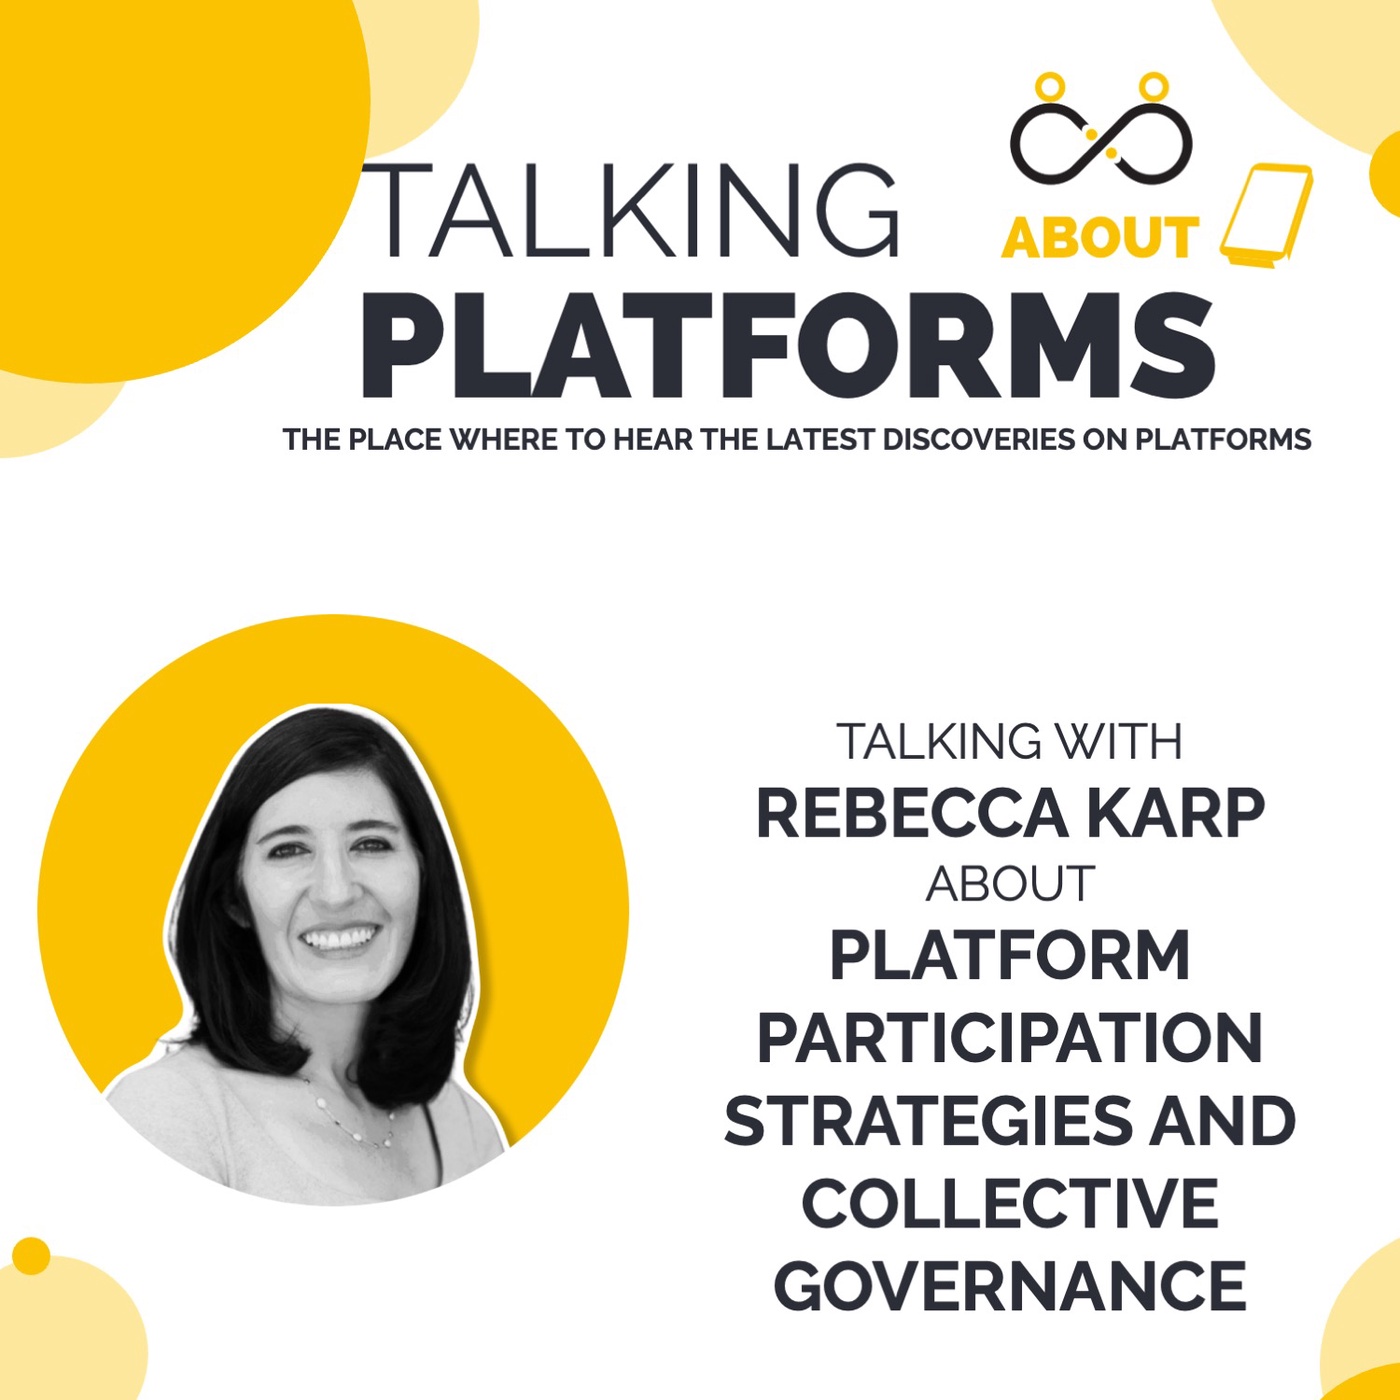 Platform participation strategies and collective governance with Rebecca Karp